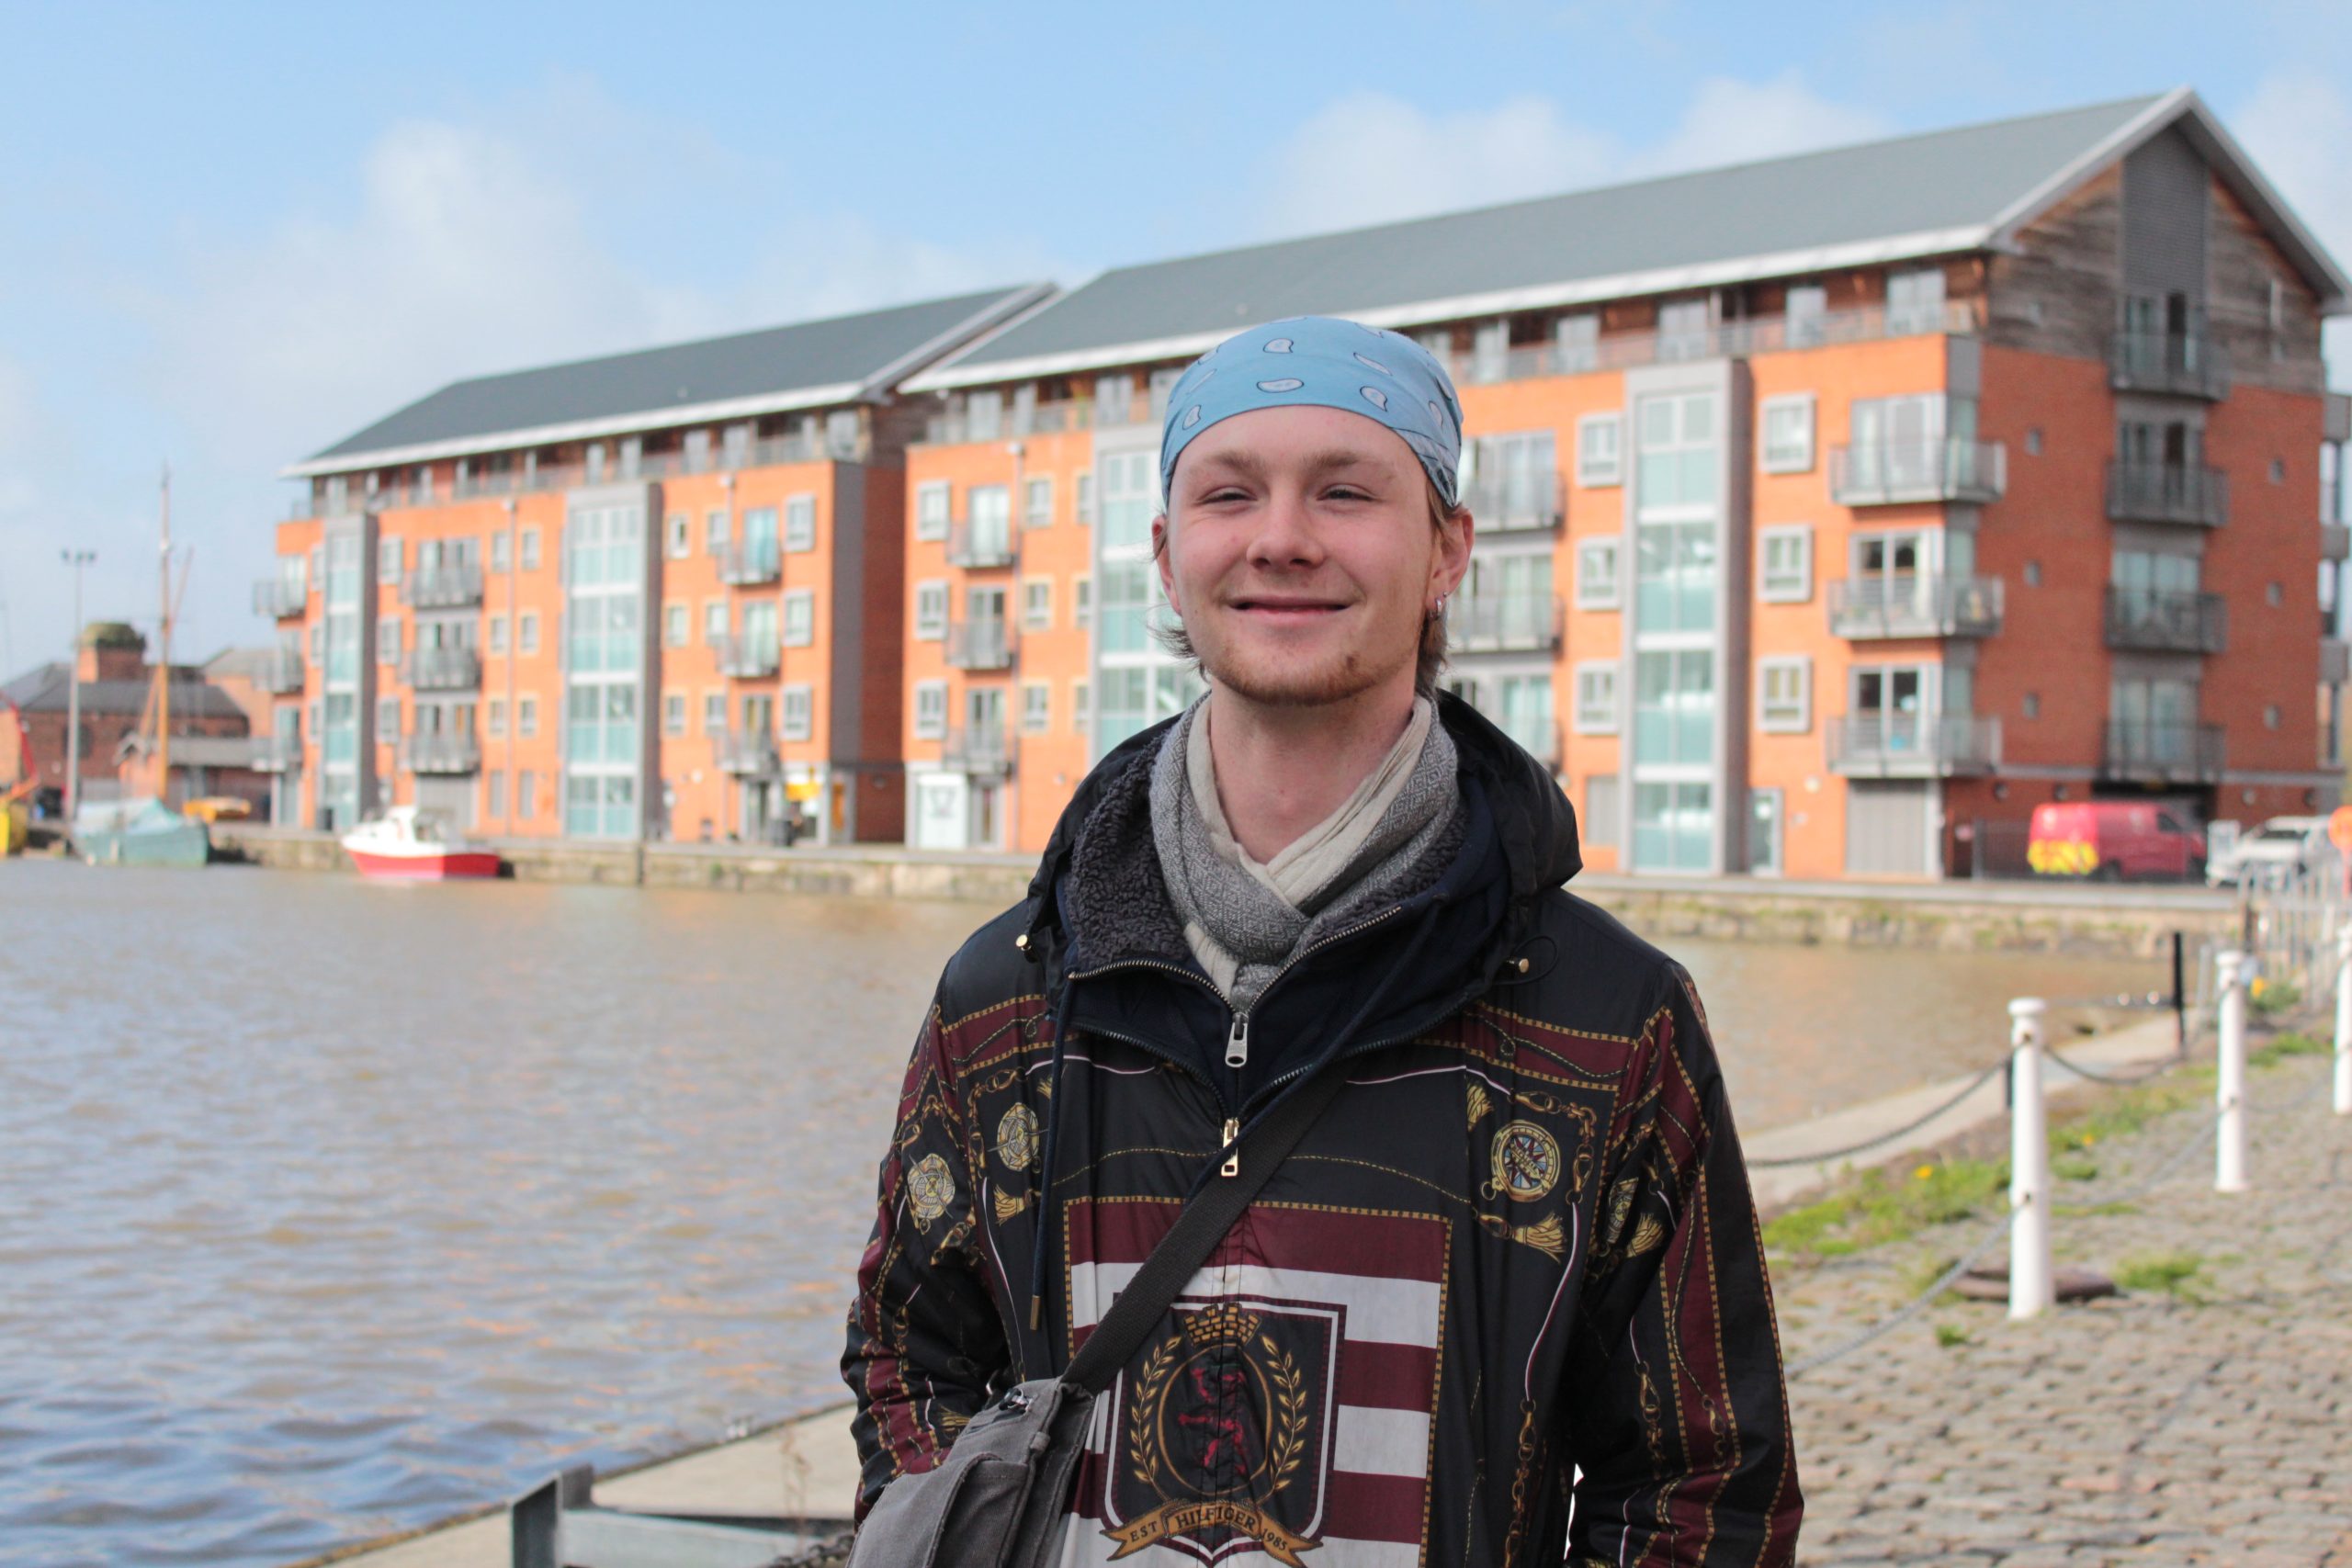 Finlay, From Unemployment to Embracing New Opportunities.